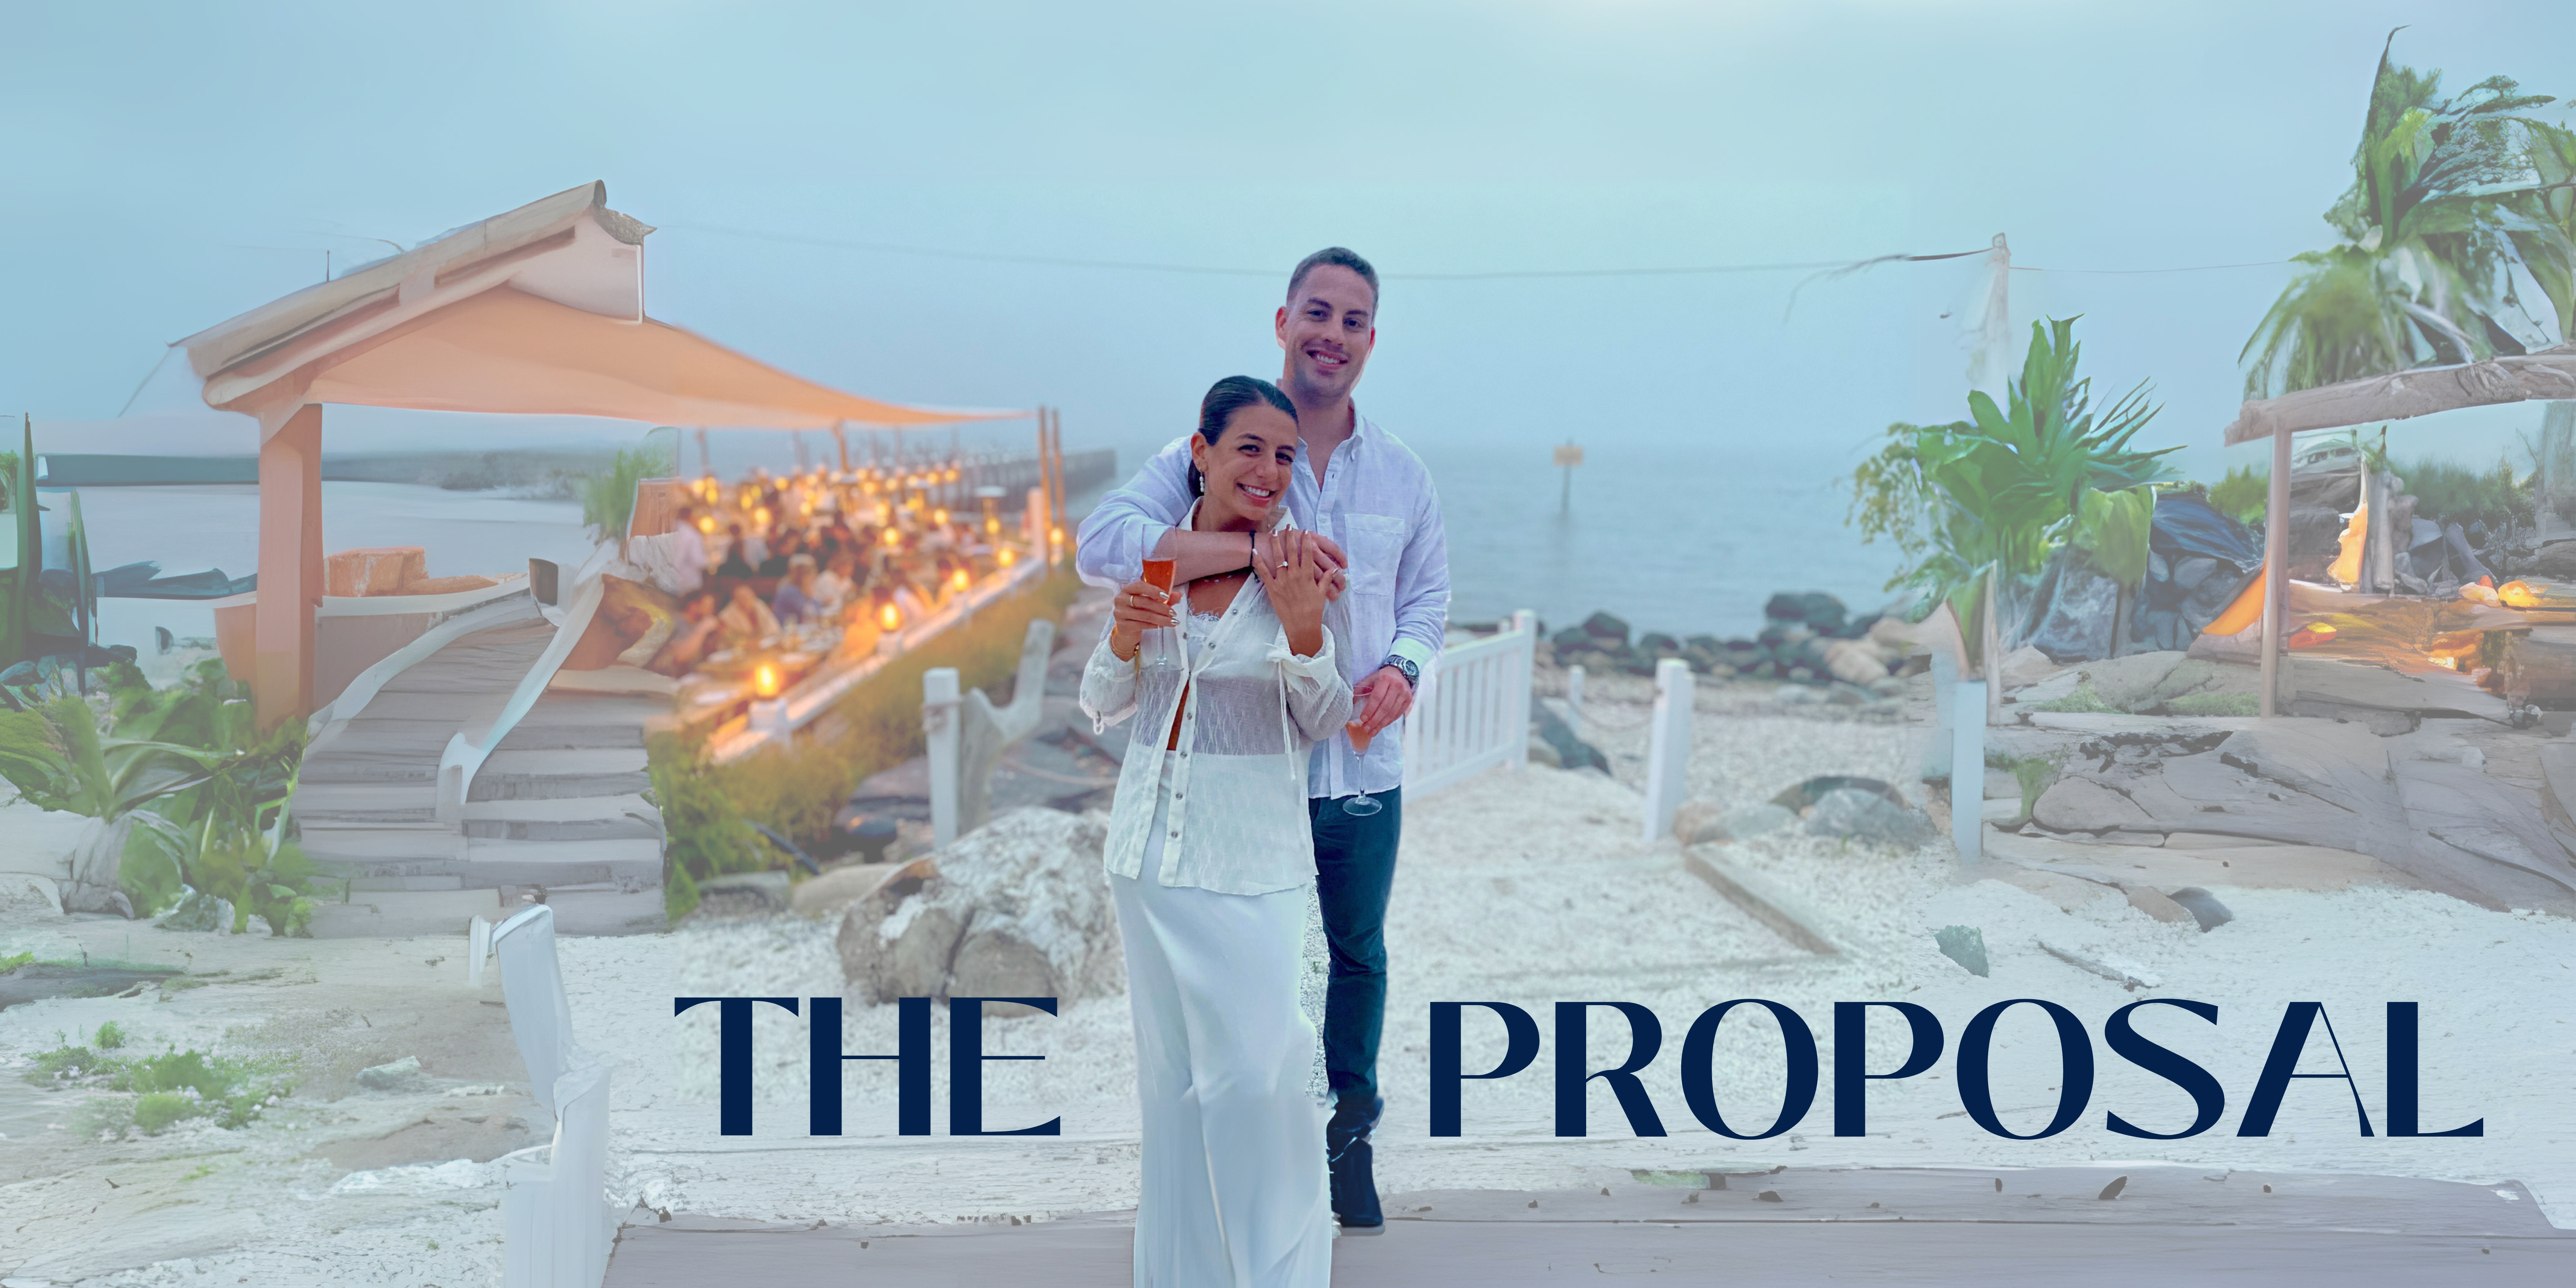 The Wedding Website of Gina Balestrieri and Paul D'Anneo